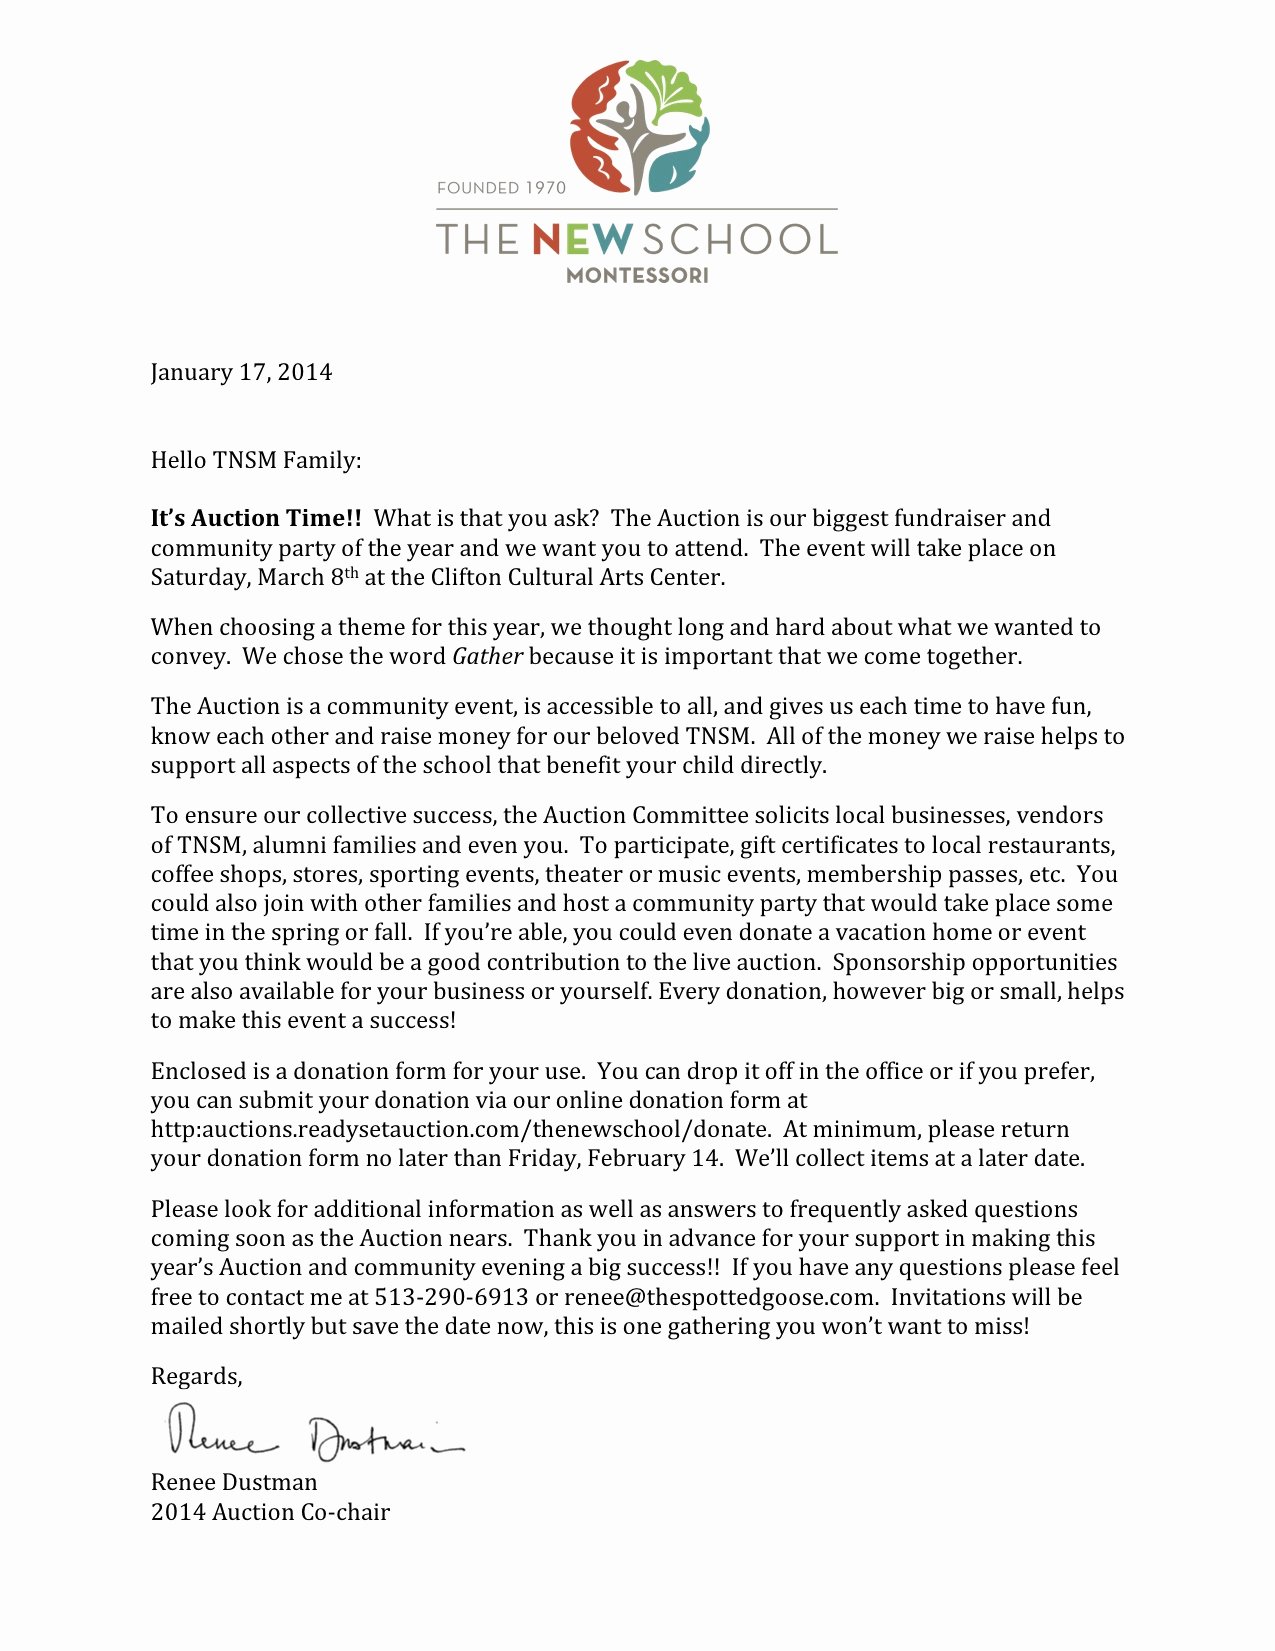 Mission Trip Donation Letter Template Inspirational Auction Letter and Donation form the New School Montessori